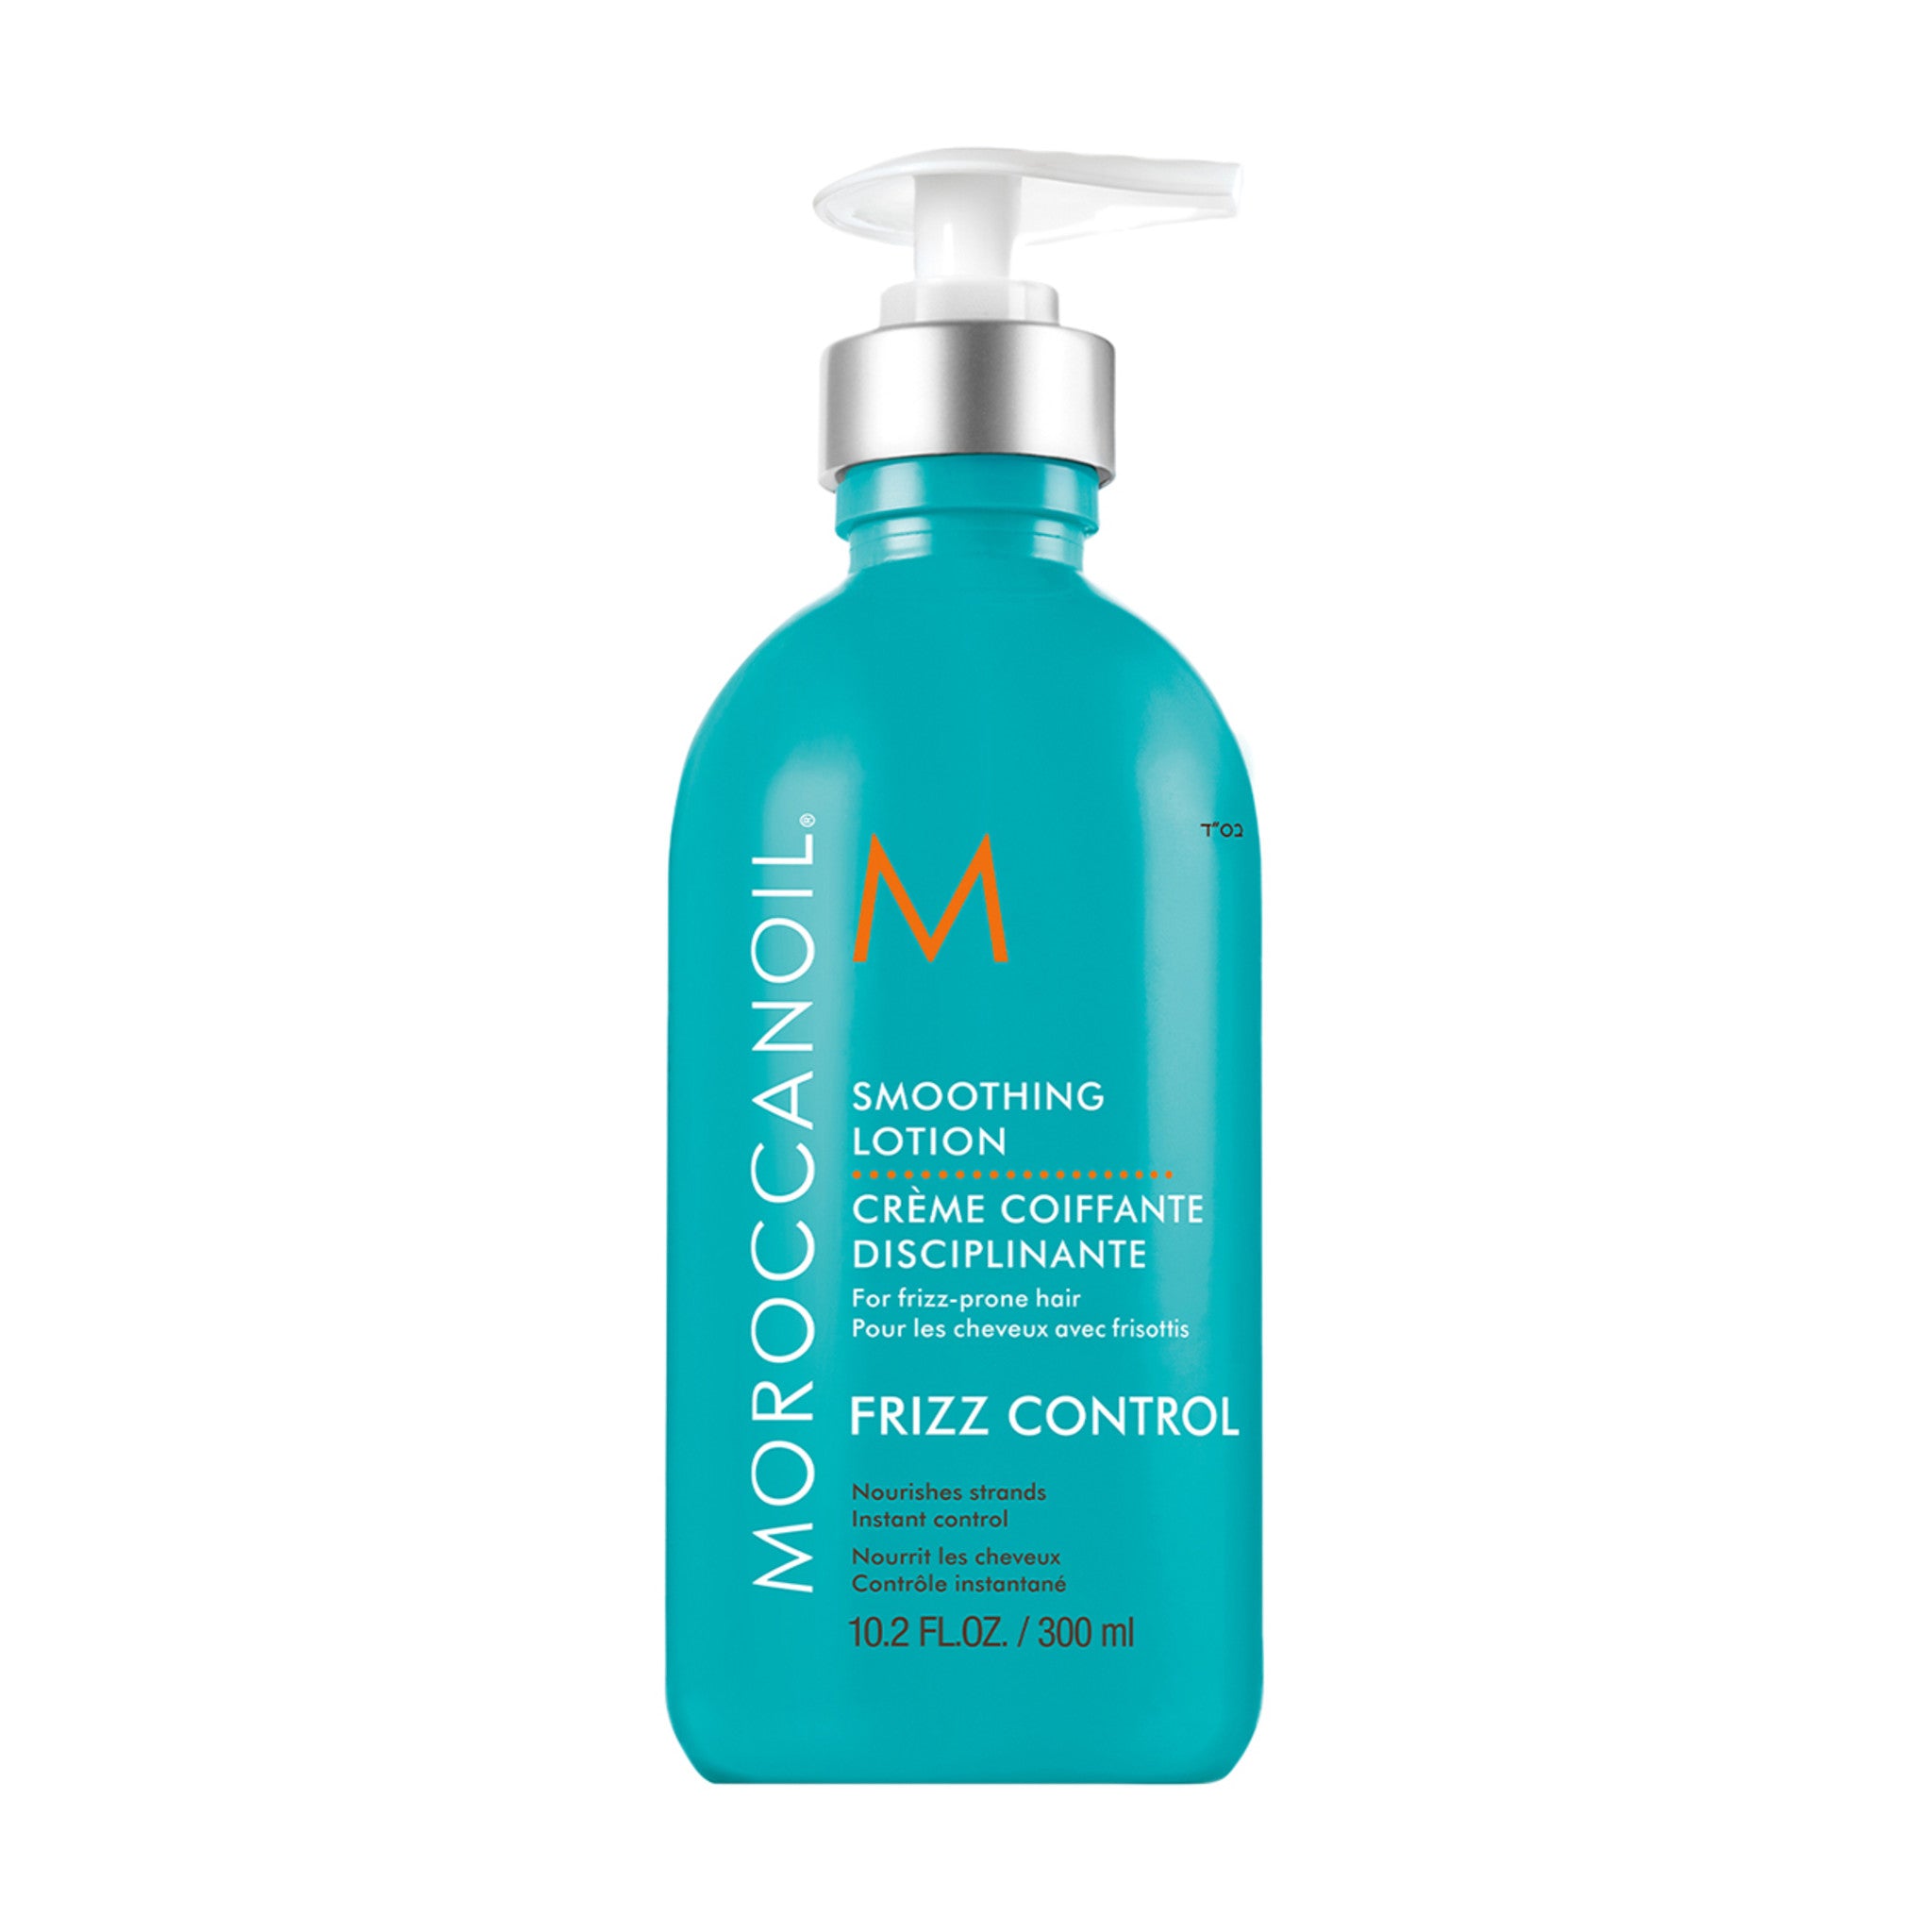 Moroccanoil Smoothing Lotion main image.